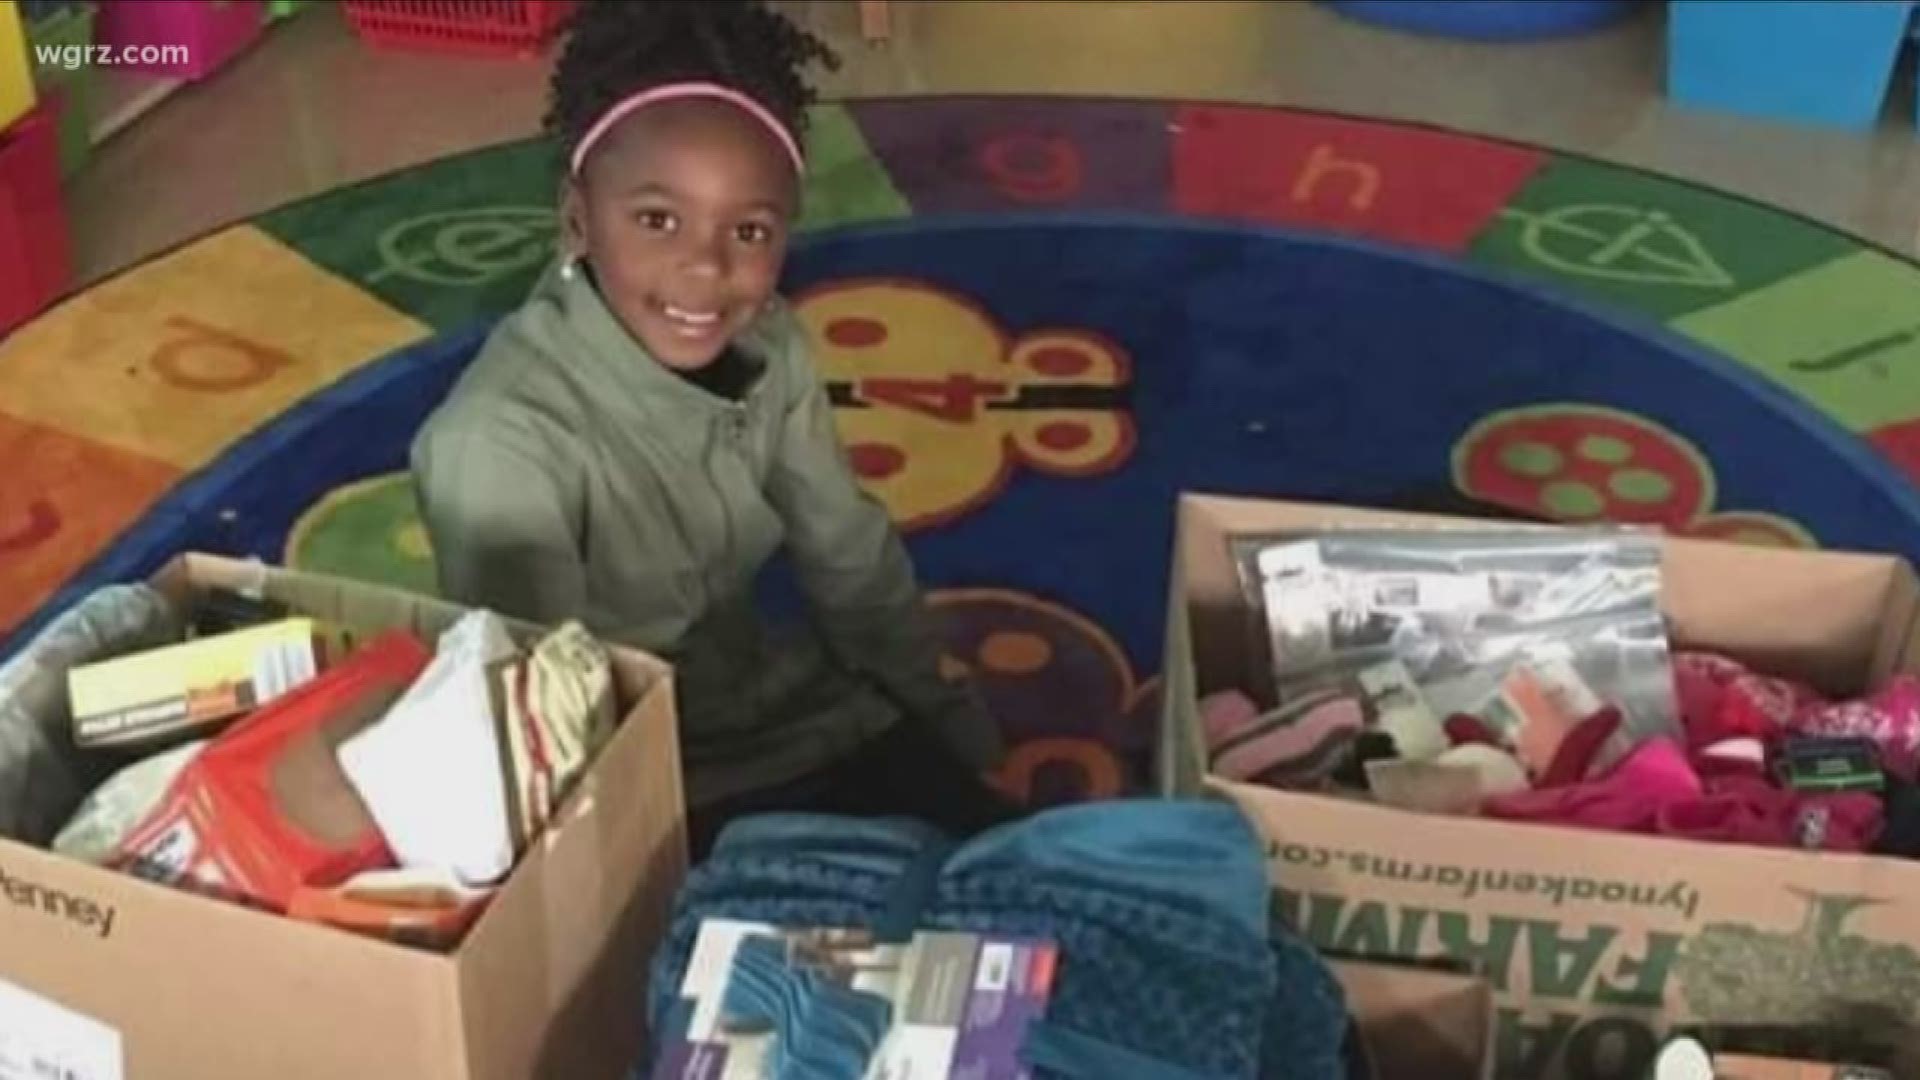 One little girl from Medina learned others might not be as fortunate as her, so she decided to do something about it.